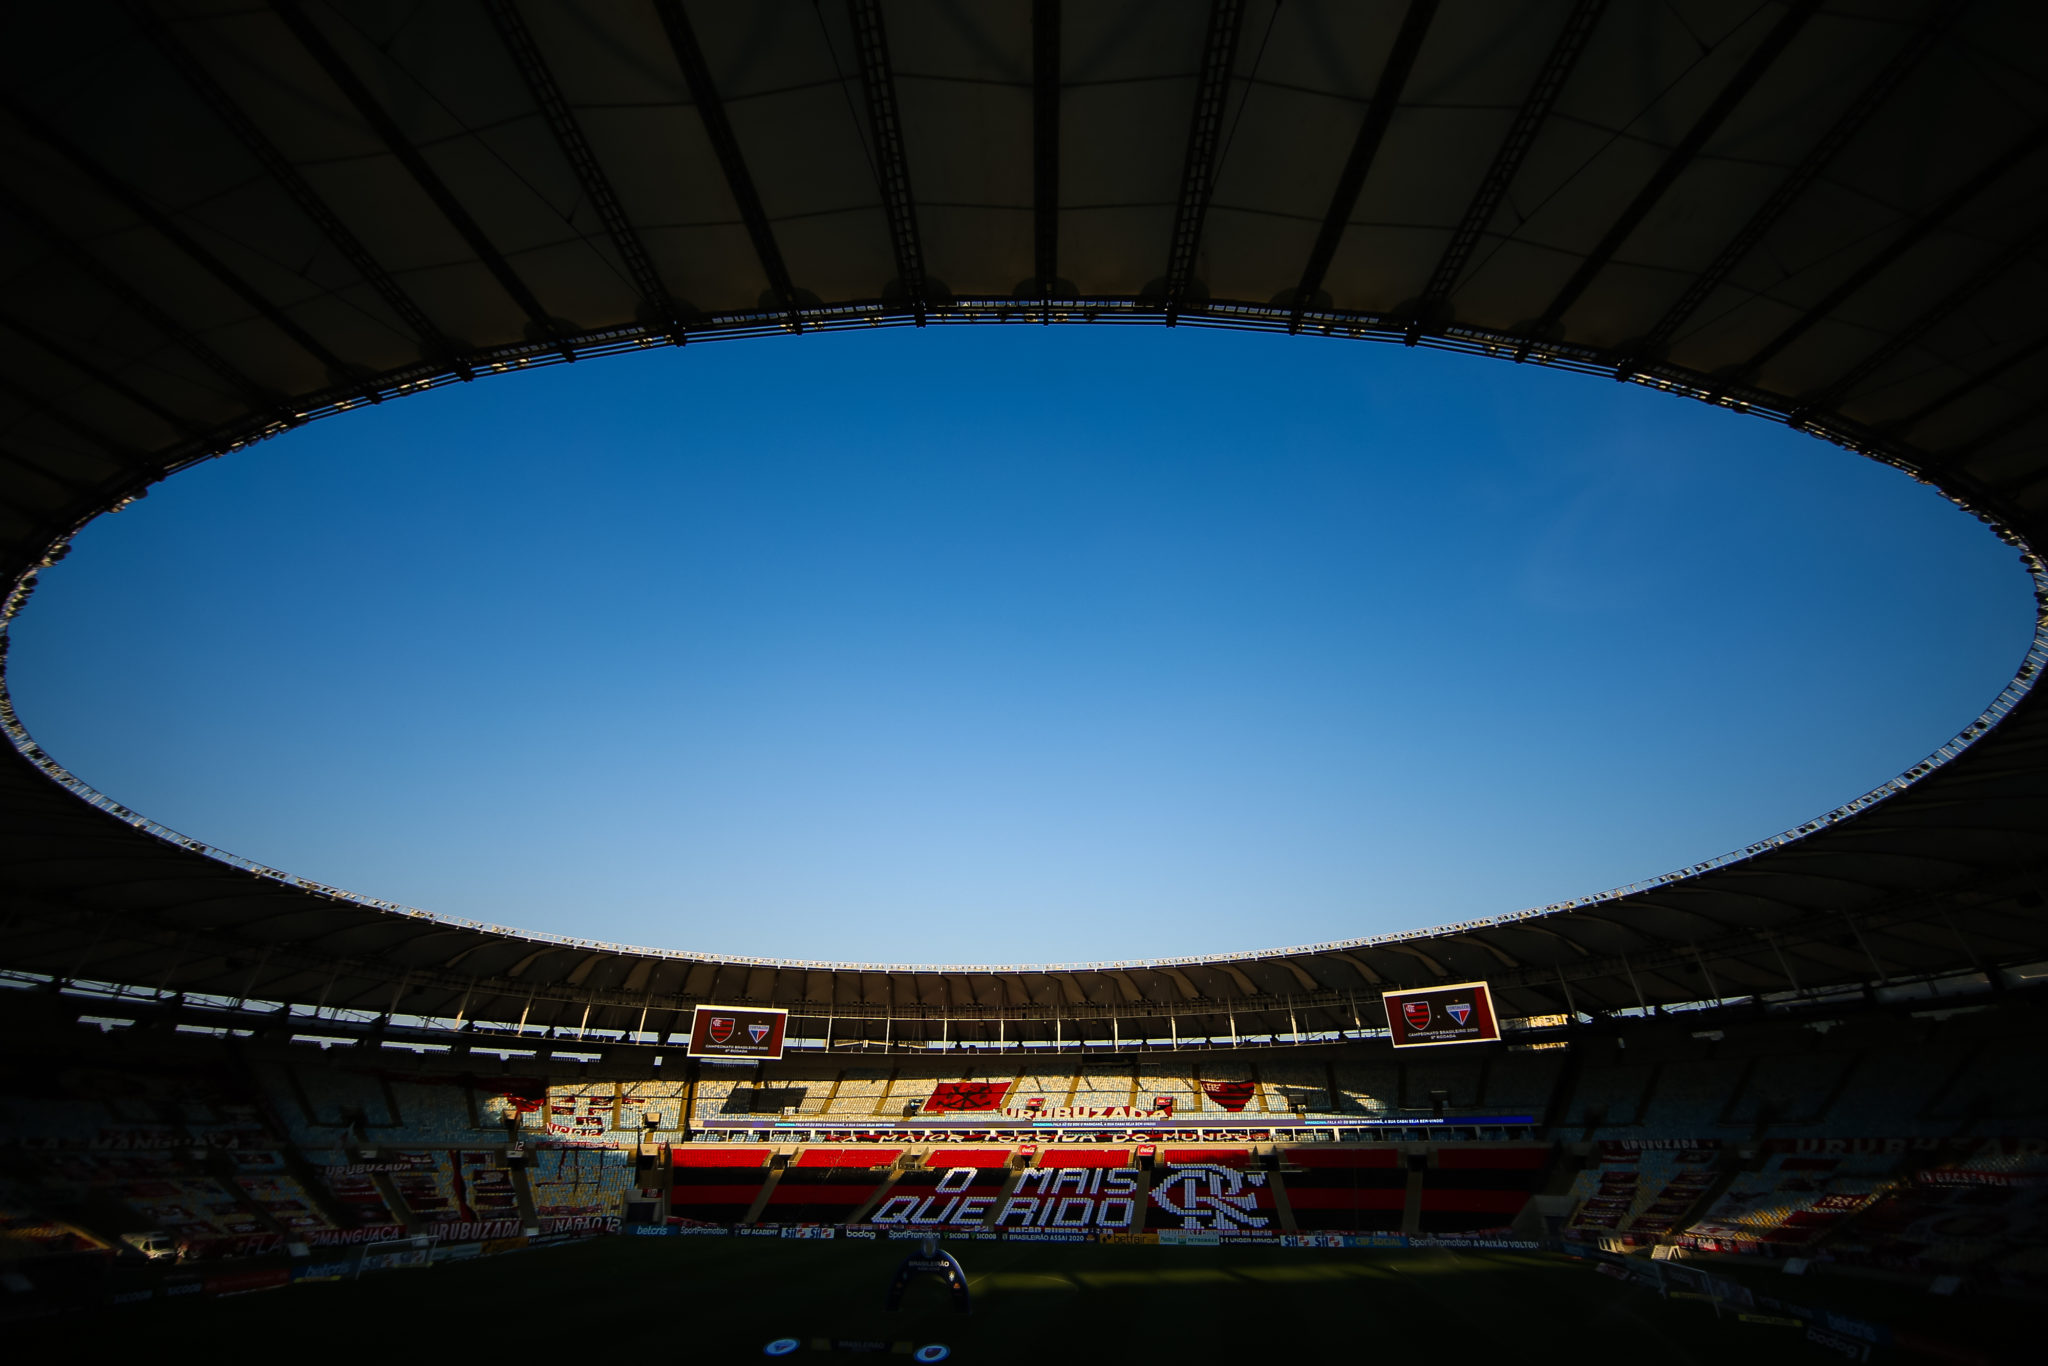 RIO DE JANEIRO, BRAZIL - SEPTEMBER 05: General view before a match between Fluminense and  Atletico GO as part of 2020 Brasileirao Series A at Maracana Stadium on September 05, 2020 in Rio de Janeiro, Brazil. (Photo by Buda Mendes/Getty Images)